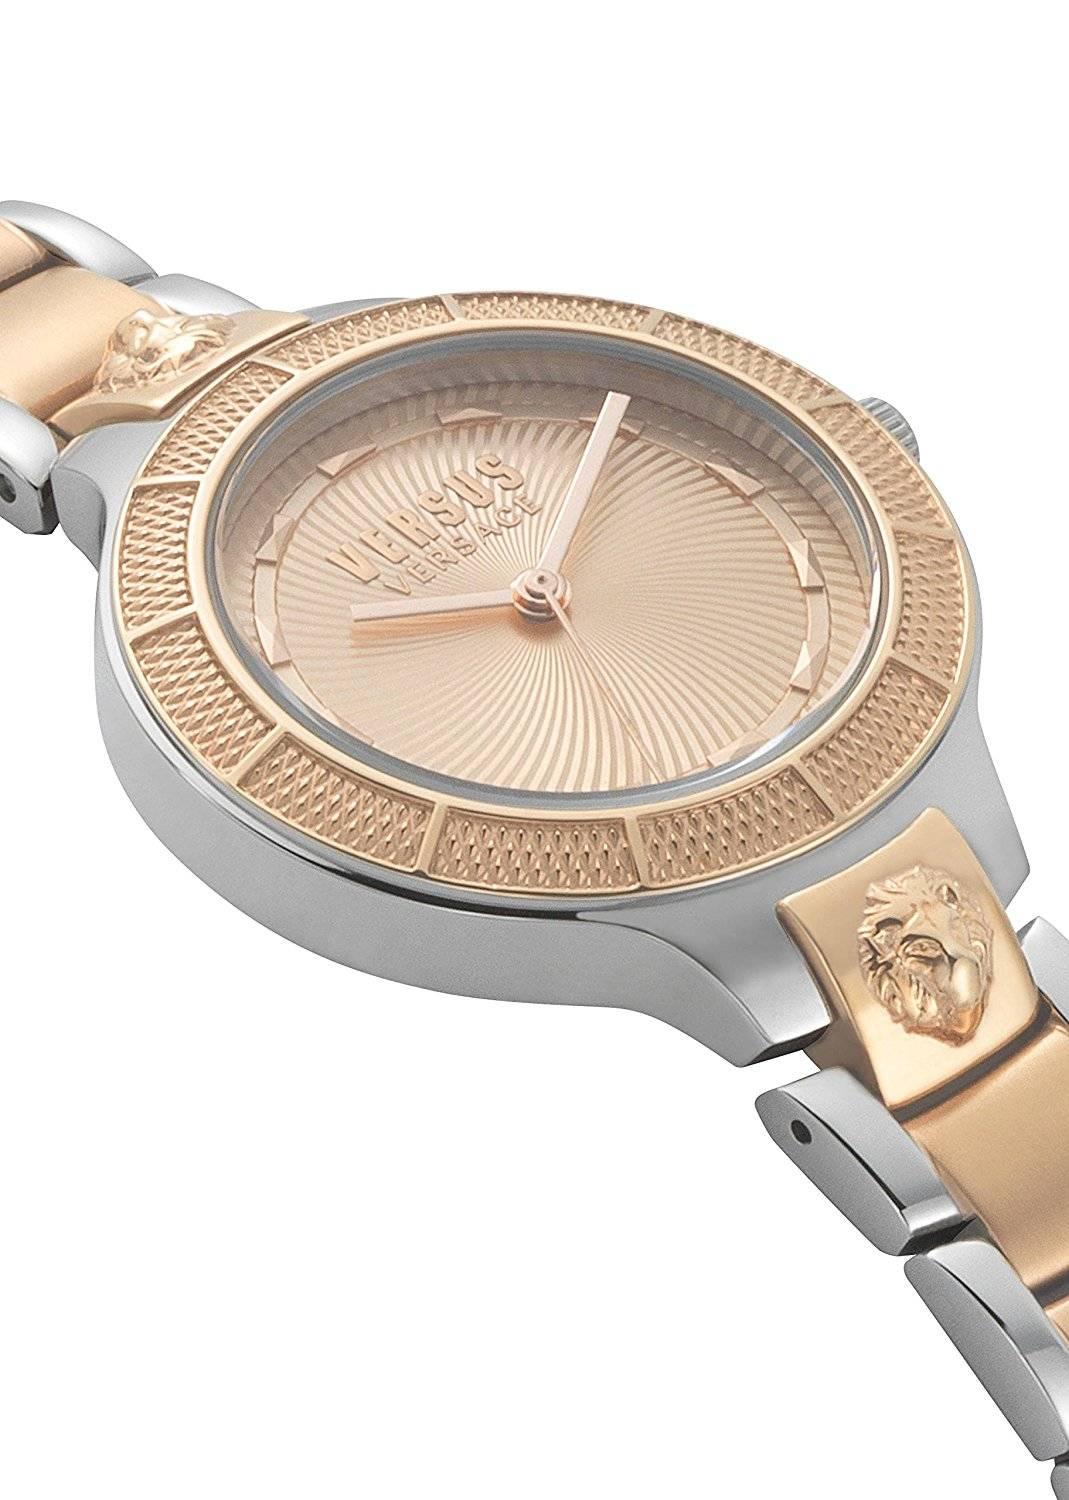 Versus silver and rose gold tone steel watch
totally made in italy
movement: Quartz